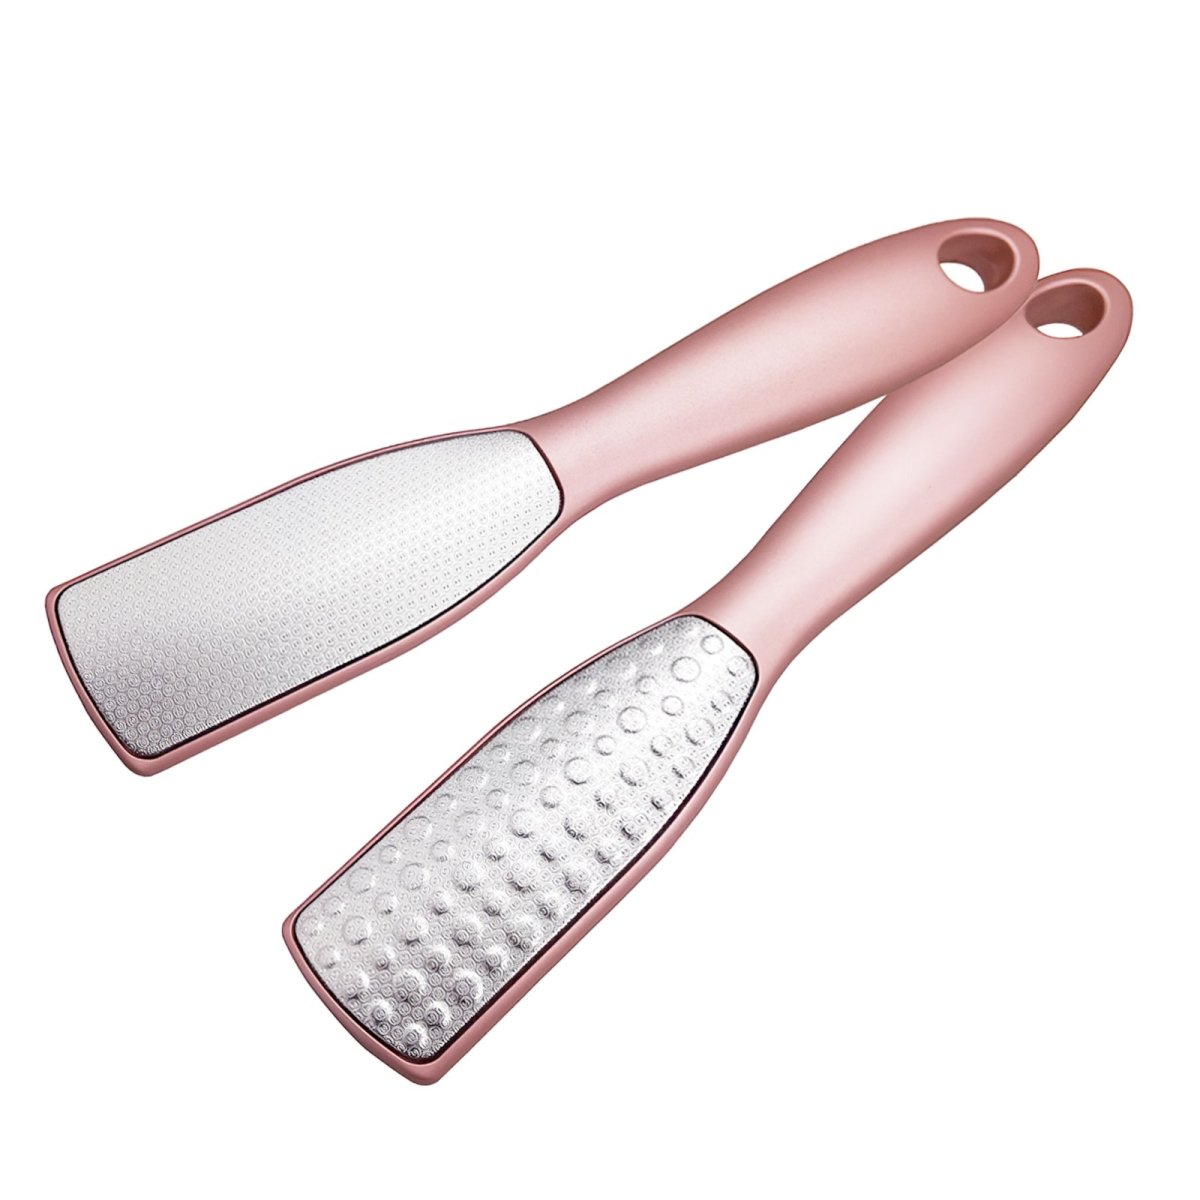 Foot File, Callus Remover - GreenLife-Manicure Supplies